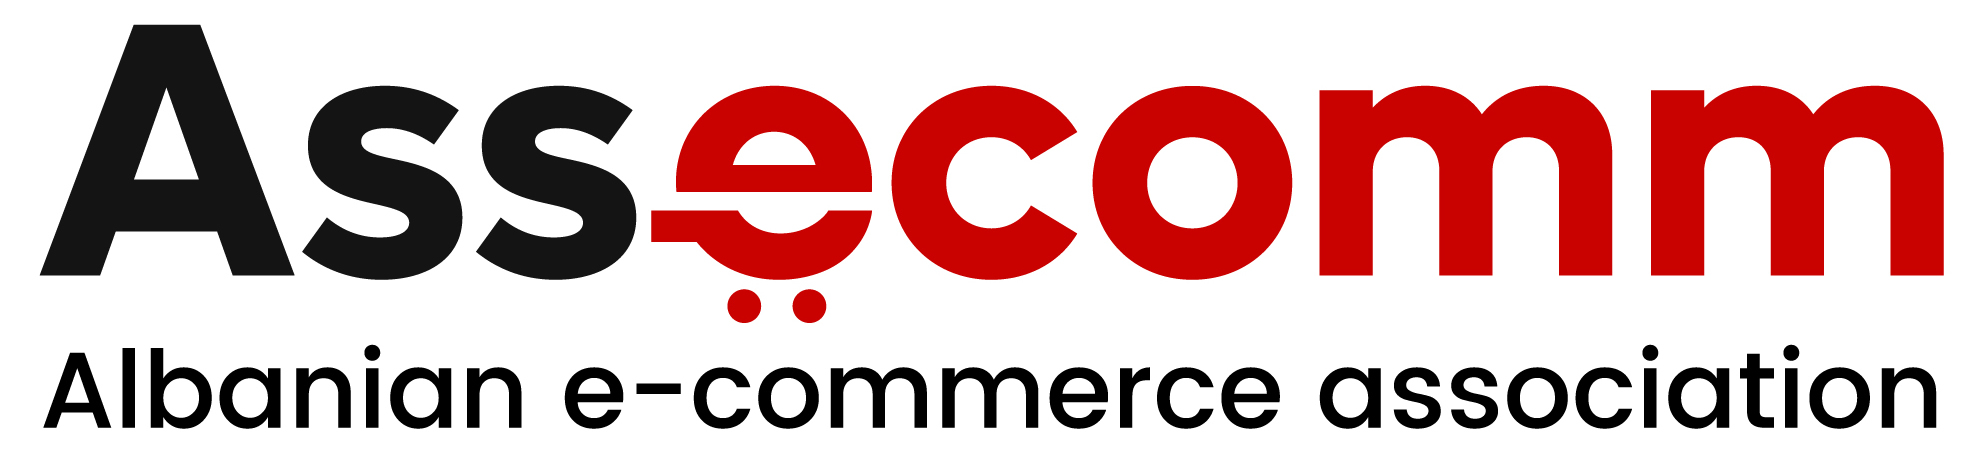 Assecomm - Associazione Ecommerce in Albania